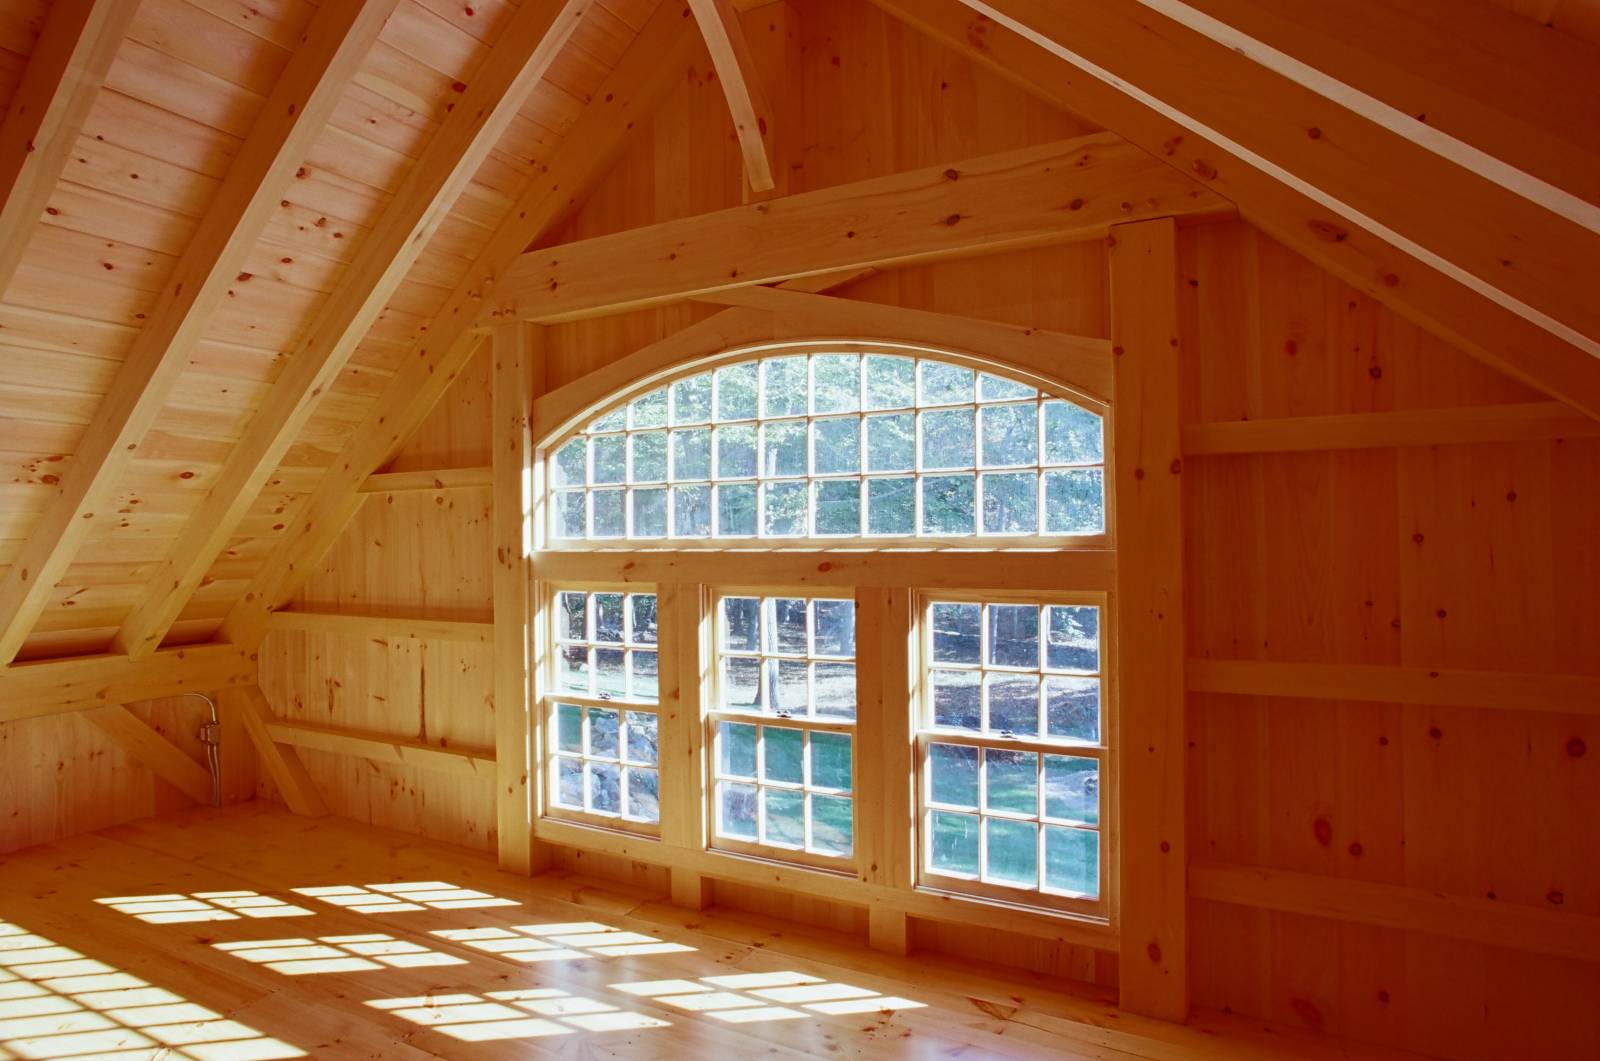 Intricate interior framing of bow top window